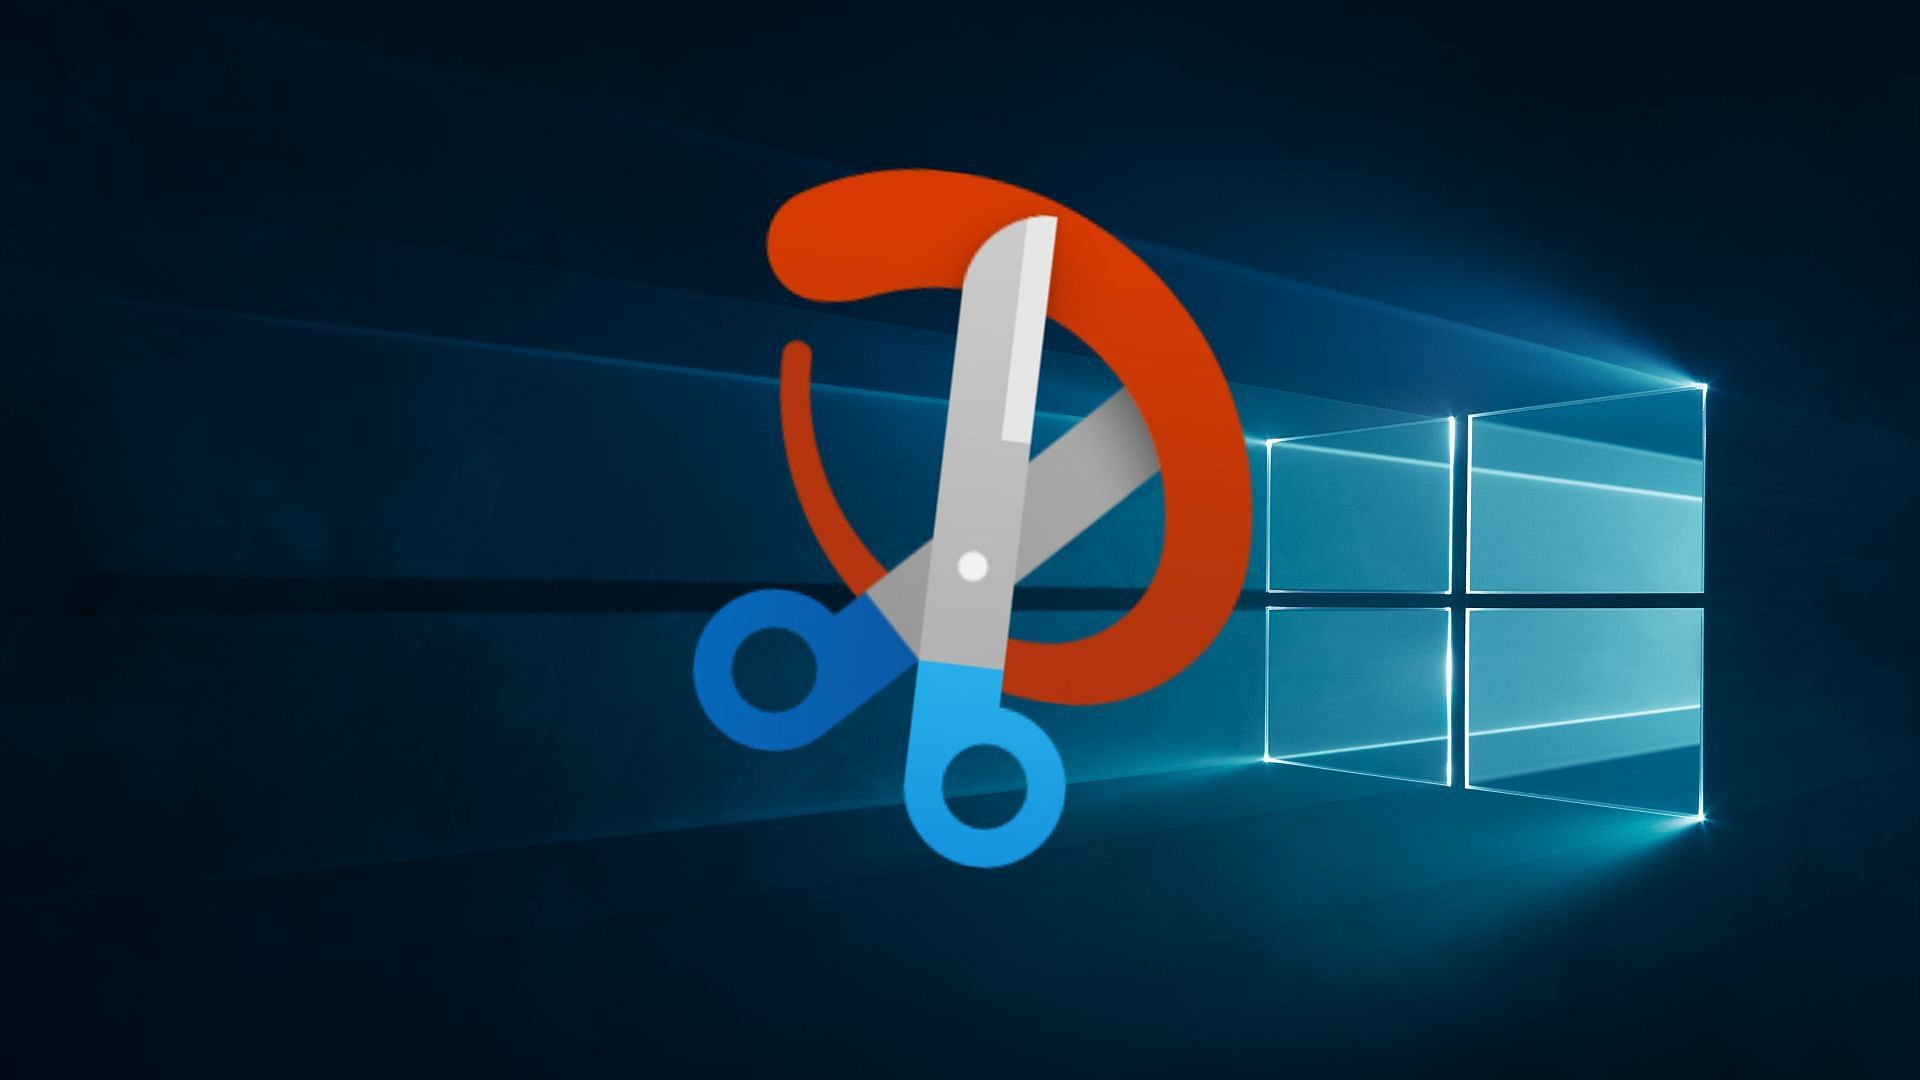 Windows 10 Replaces The Snipping Tool With Snip  Sketch